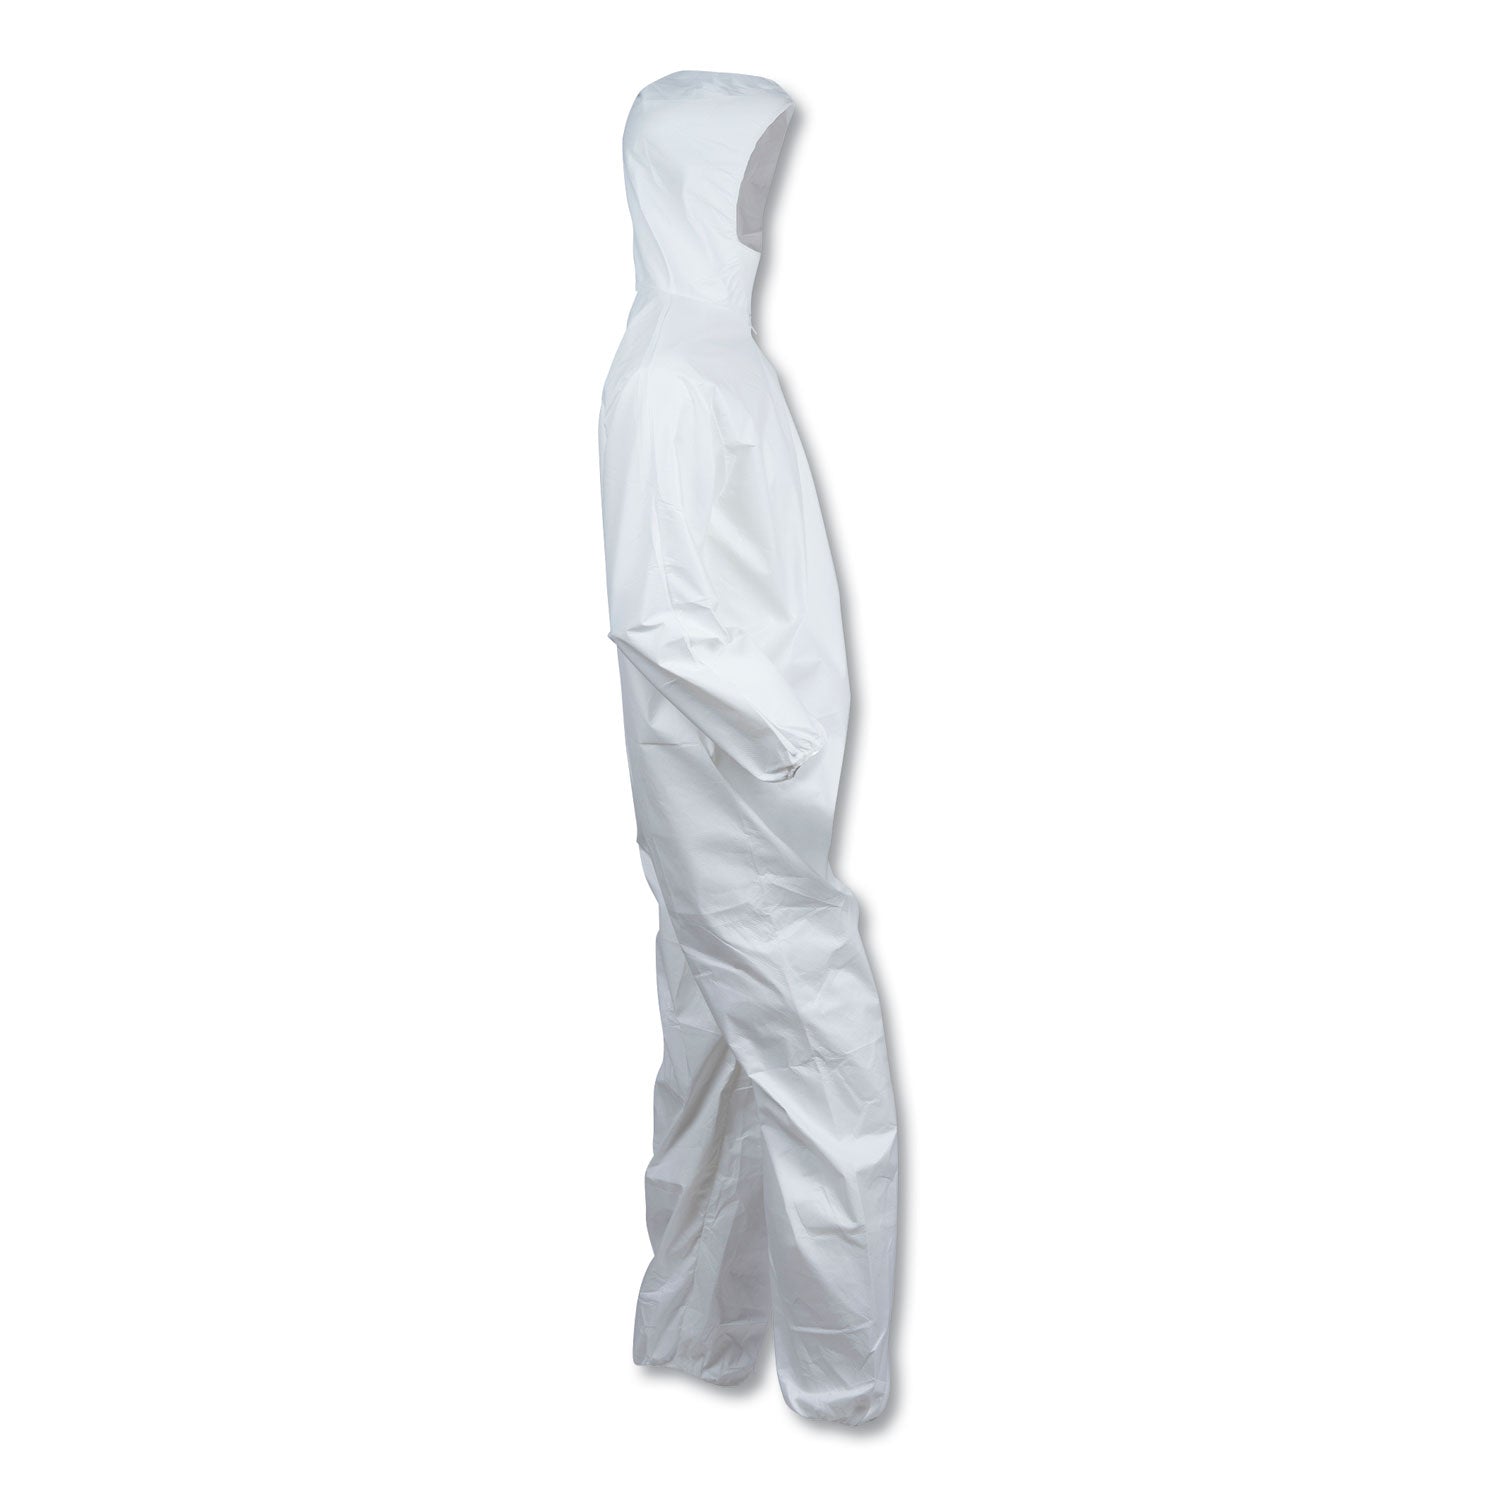 a40-elastic-cuff-and-ankles-hooded-coveralls-x-large-white-25-carton_kcc44324 - 5